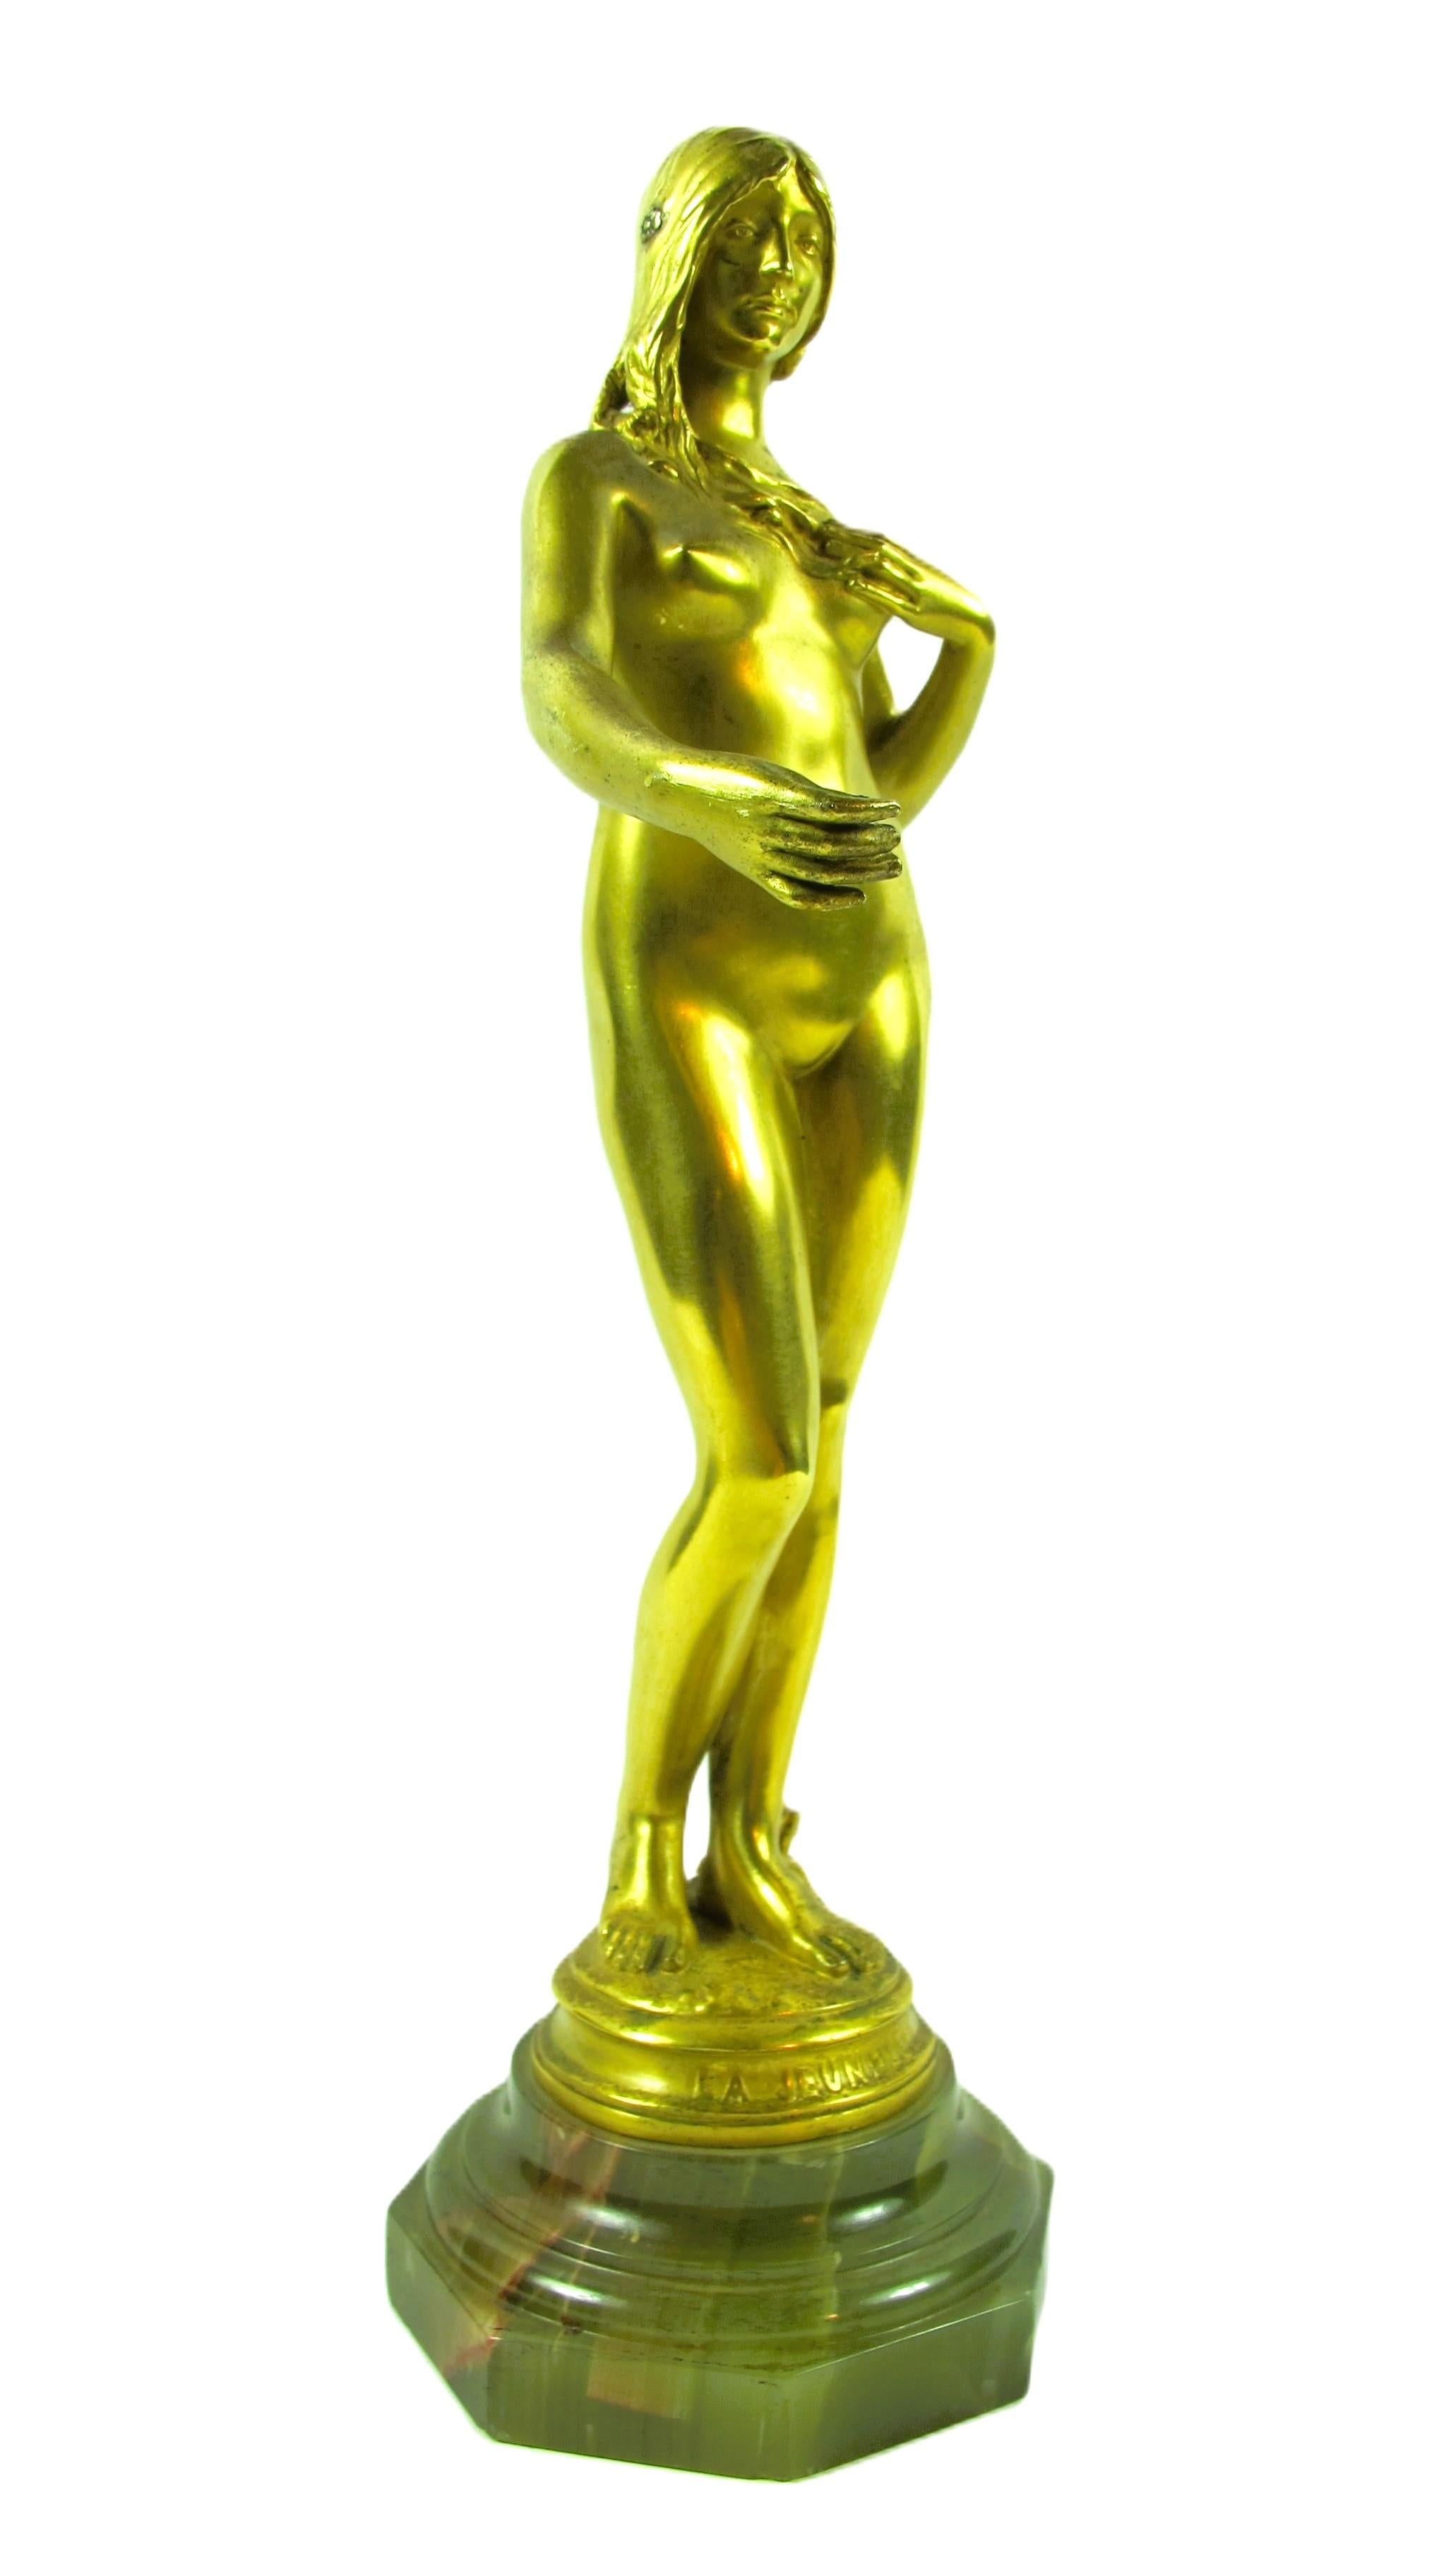 French Gilt Bronze Sculpture by Antonin Carlès (1851-1919) “Youth” For Sale